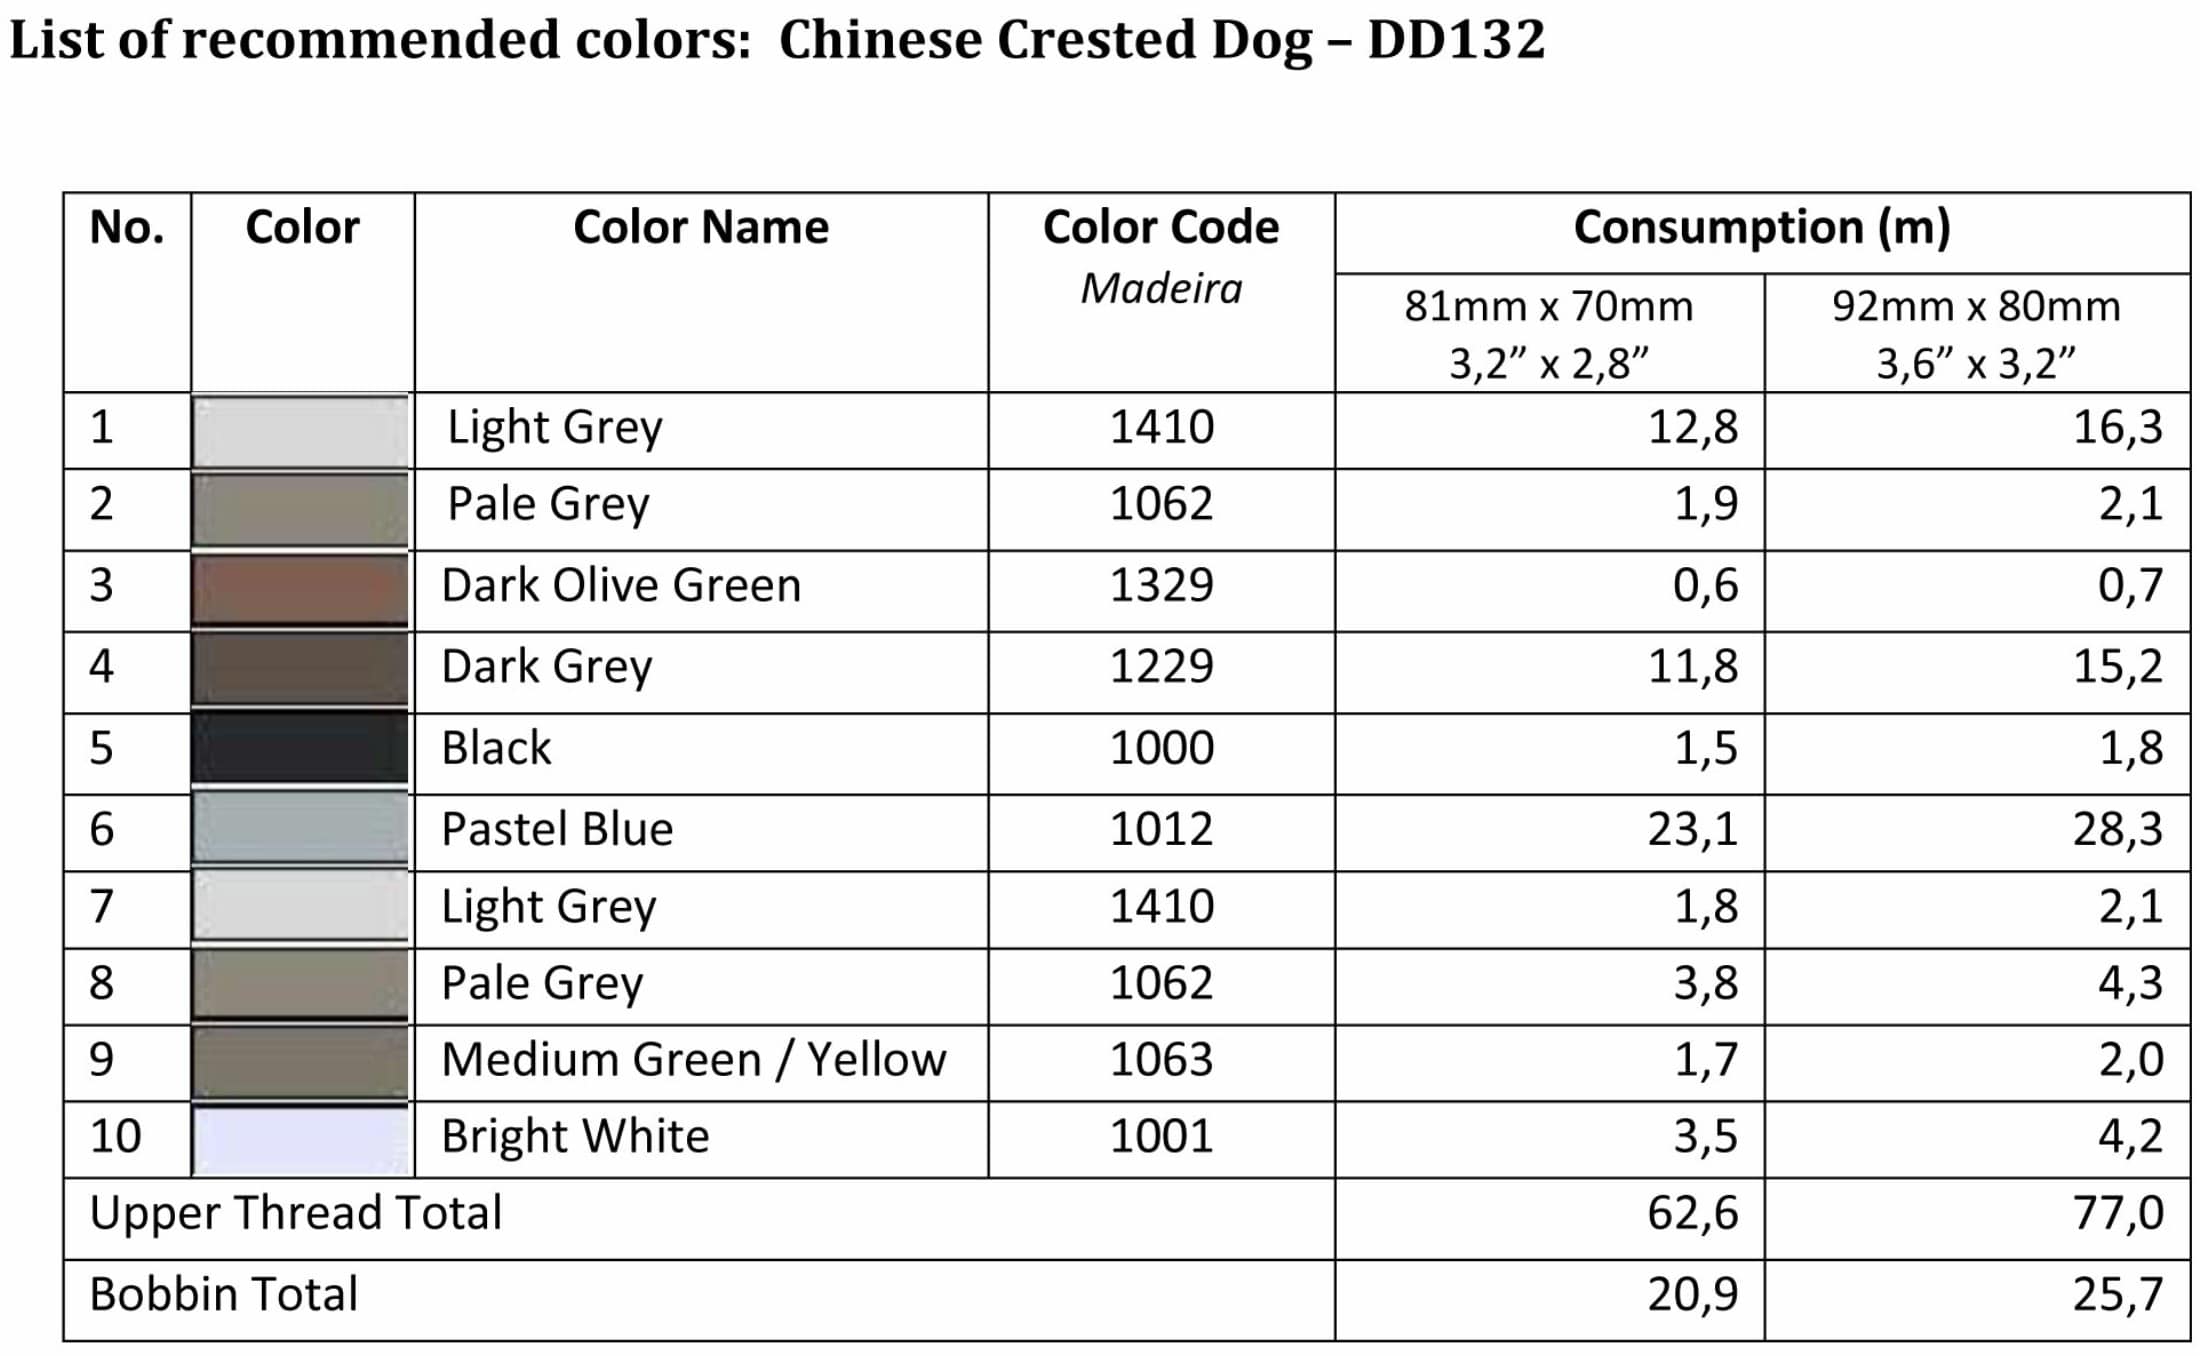 List of recommended colors - DD132